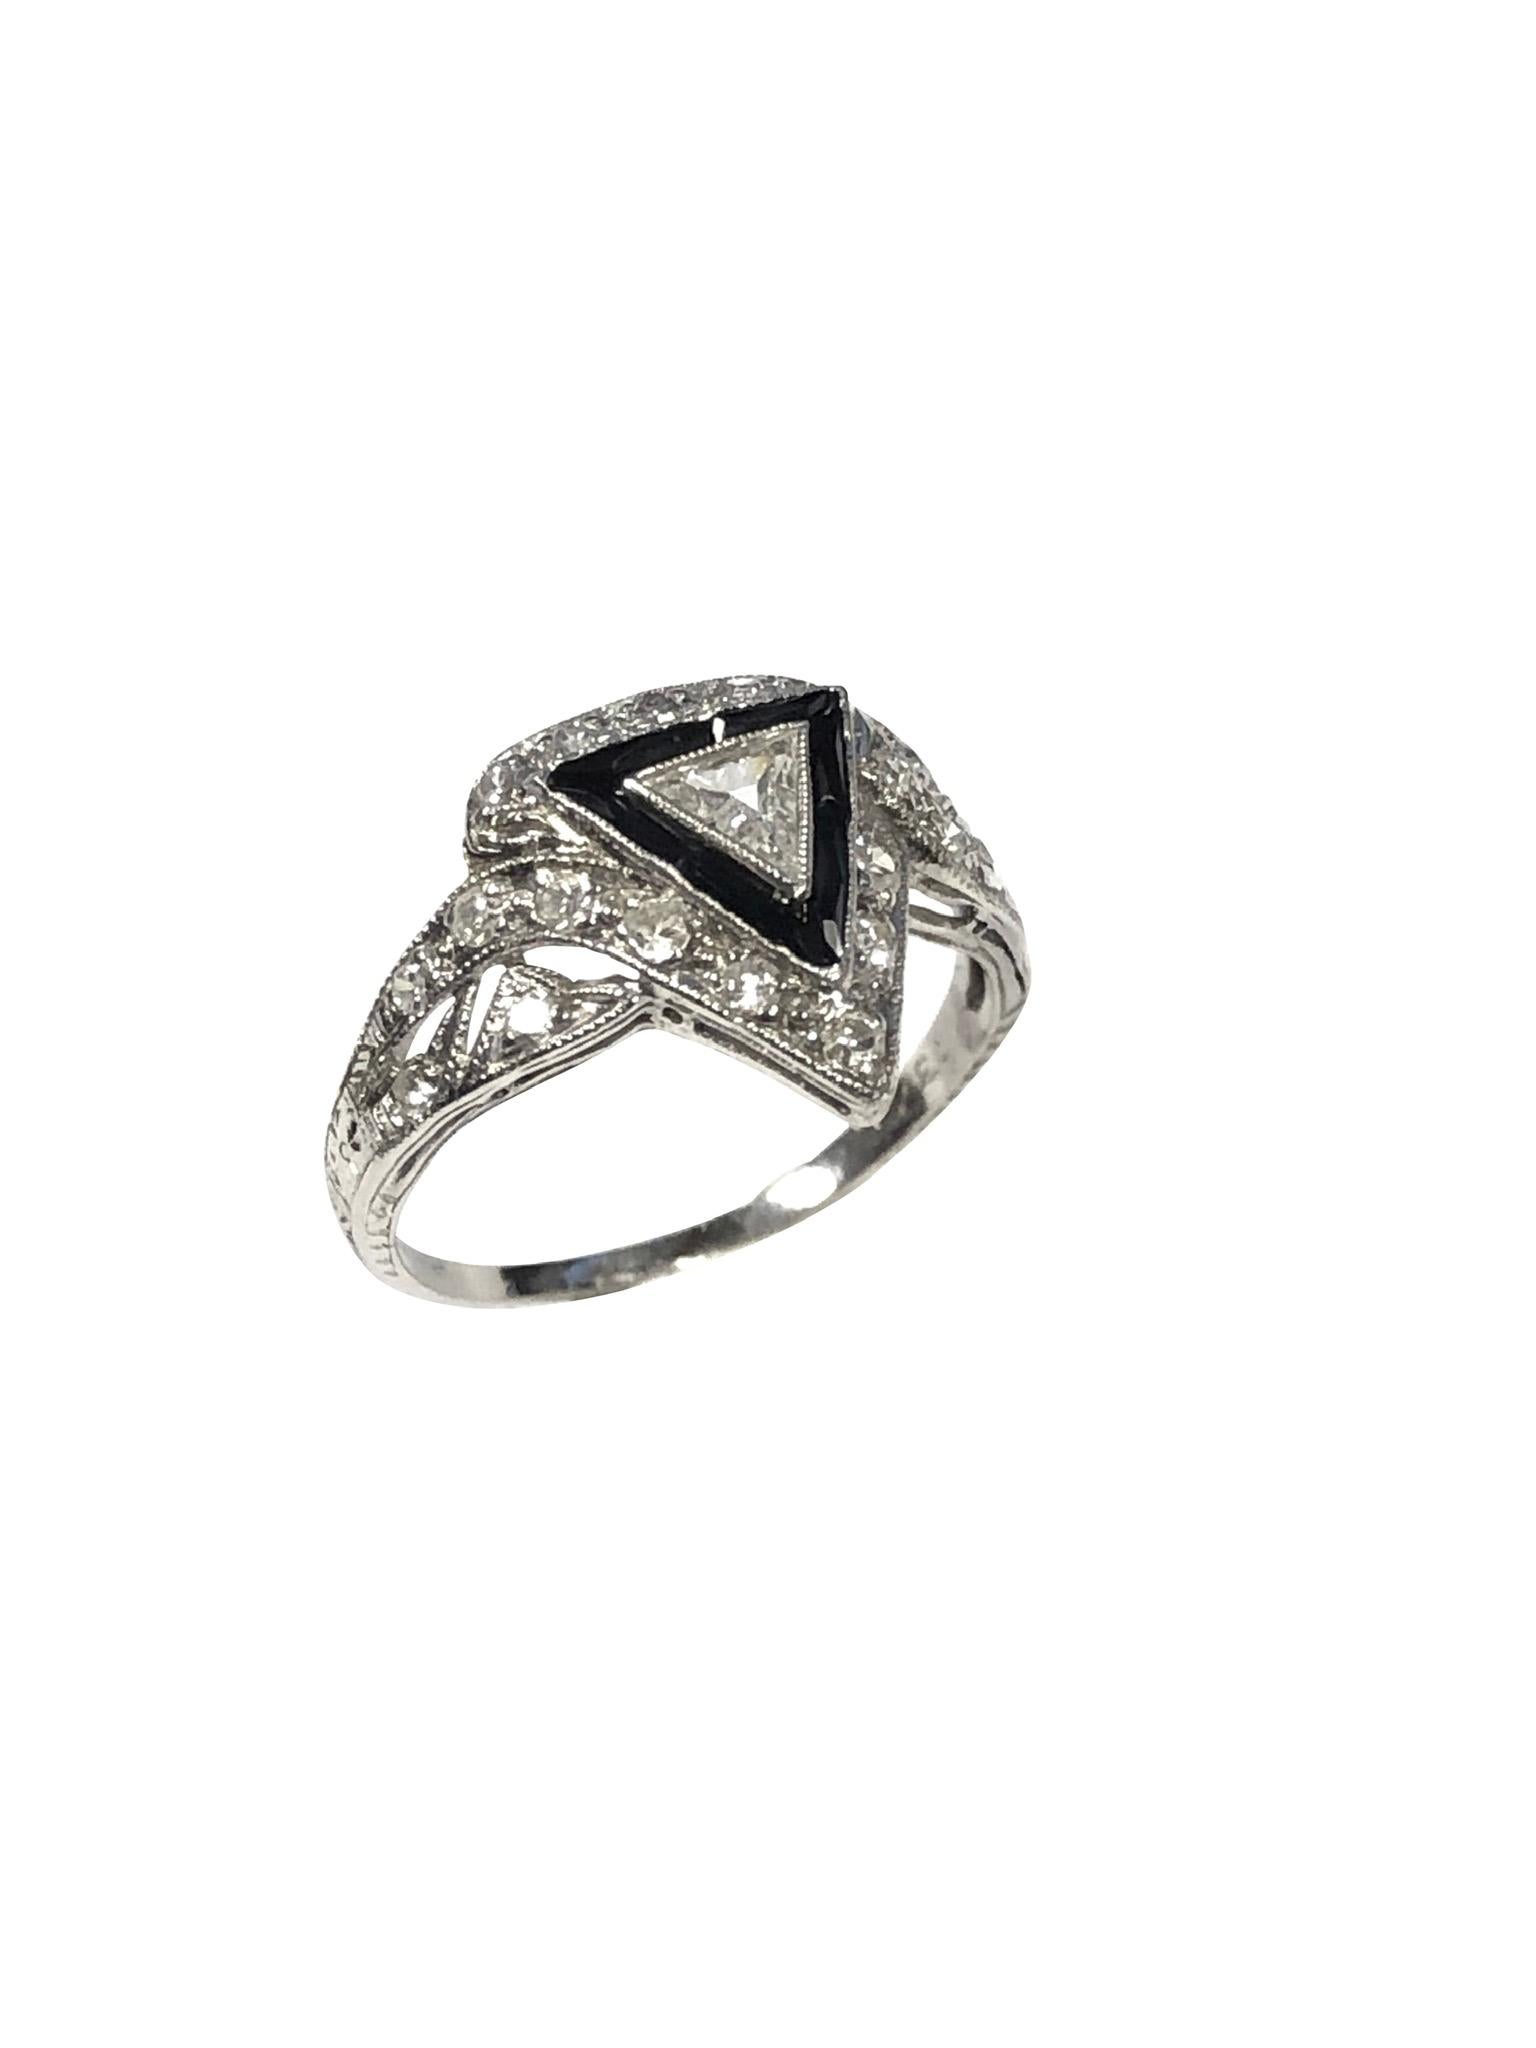 Circa 1930 Platinum Ring having Good strong Art Deco styling, centrally set with a Triangular cut Diamond approximately 1/2 Carat, surrounded by Rectangular faceted Onyx and further set with smaller old cut Diamonds. The top of the ring measures 1/2